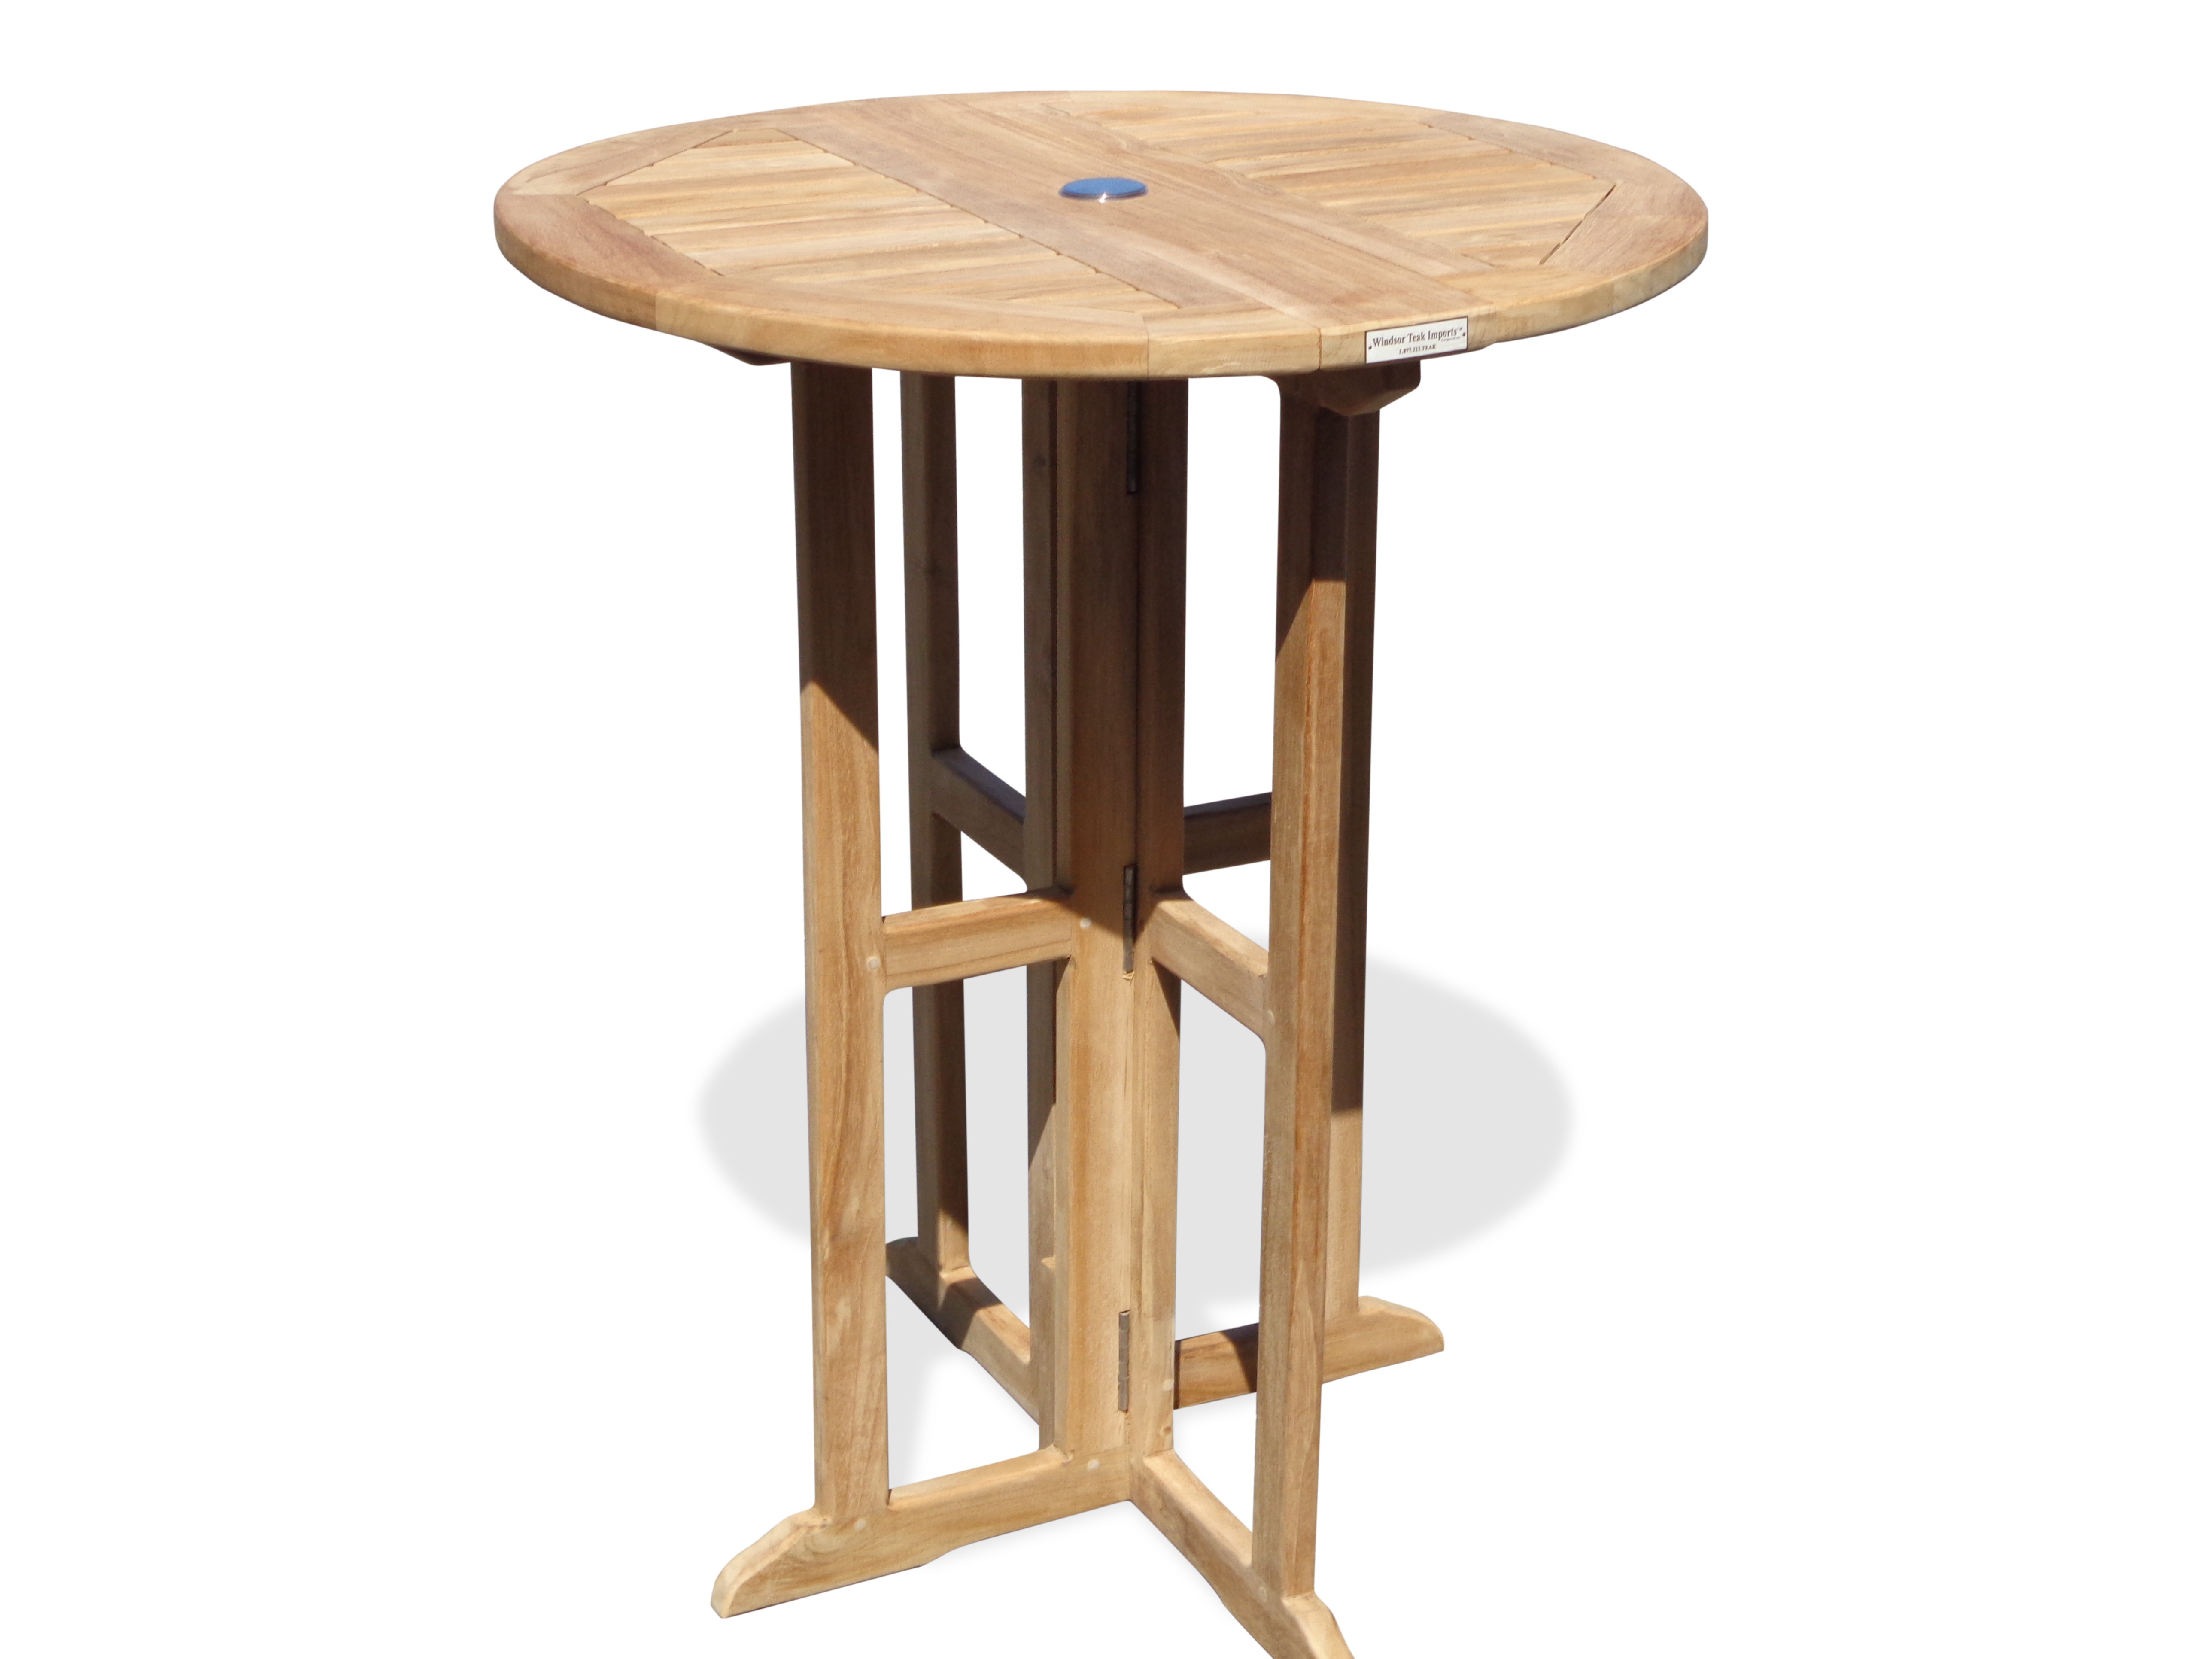 Bimini 32" Round Drop Leaf Folding Counter Table ...use with 1 Leaf Up or 2.... Makes 2 different tables (Counter height is 5" lower than bar)